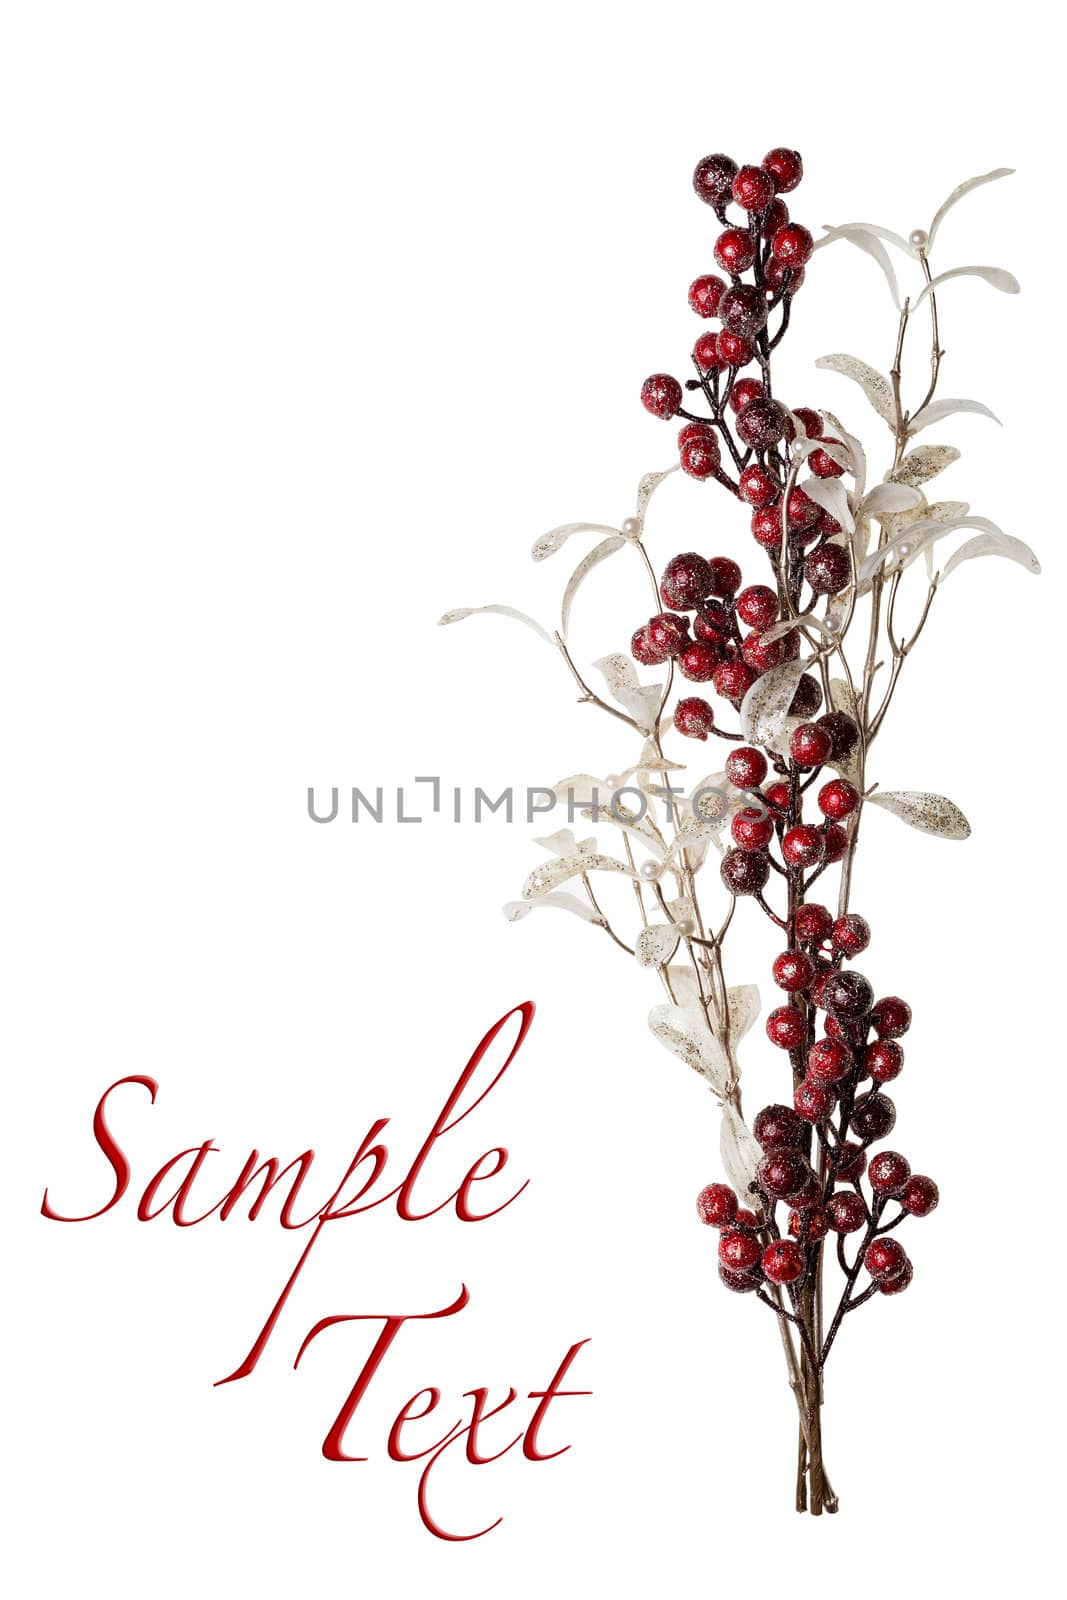 Sparkly Red Berries and Silver Glitter Pearl Leaves Background by scheriton